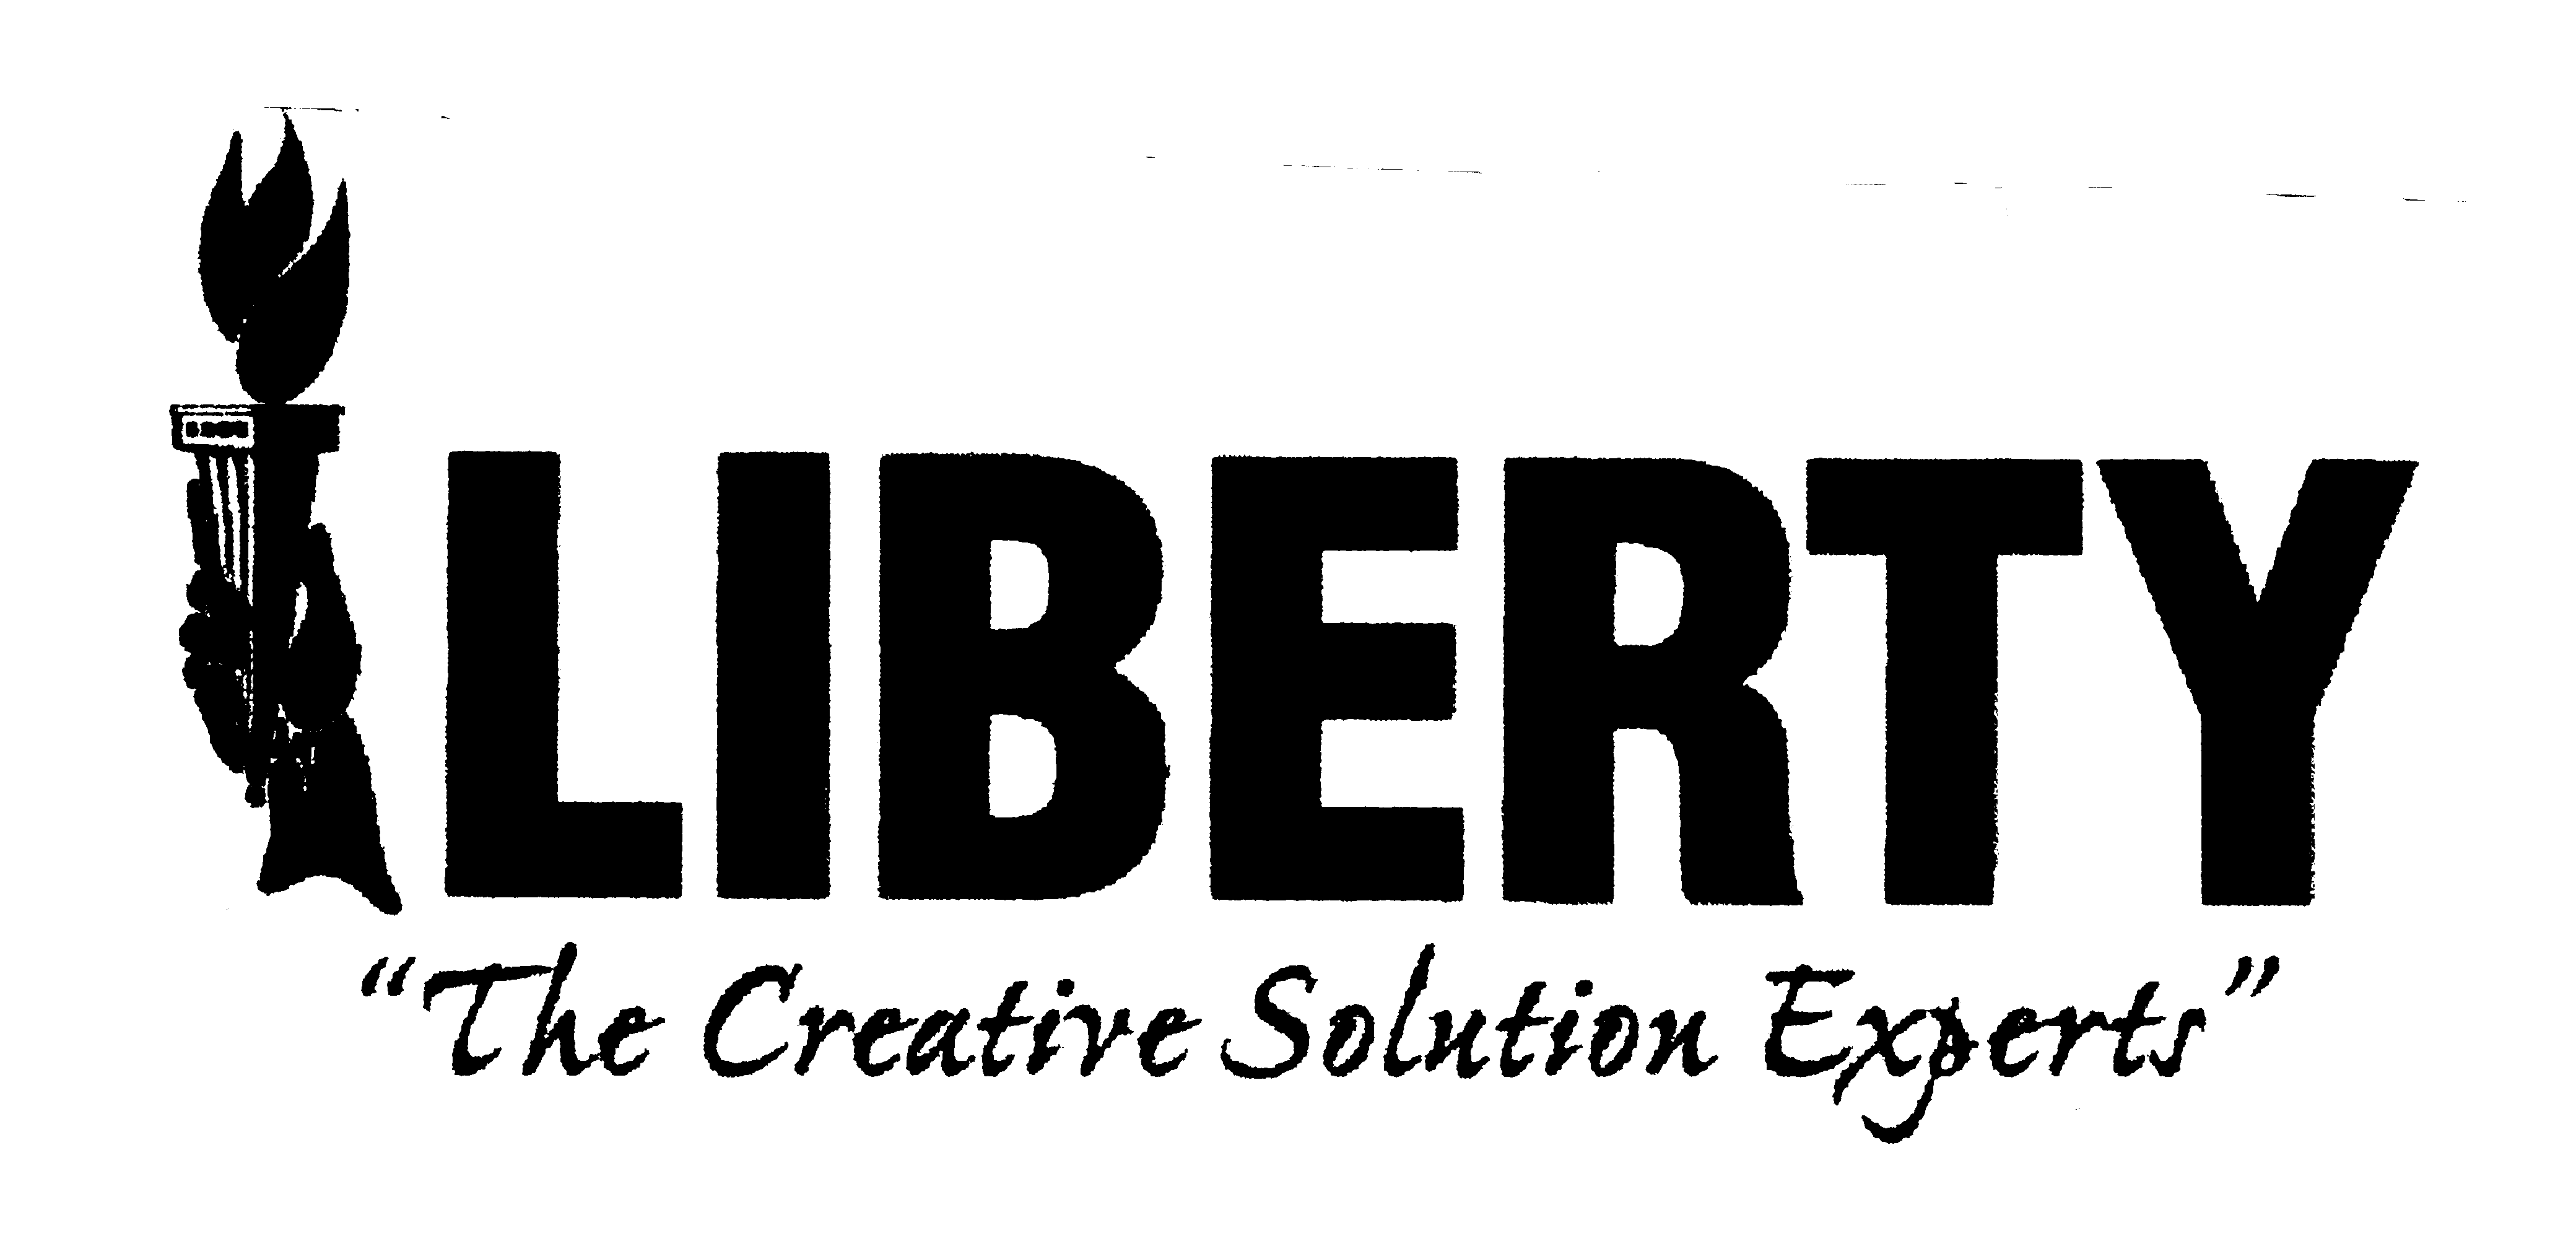  LIBERTY "THE CREATIVE SOLUTION EXPERTS"